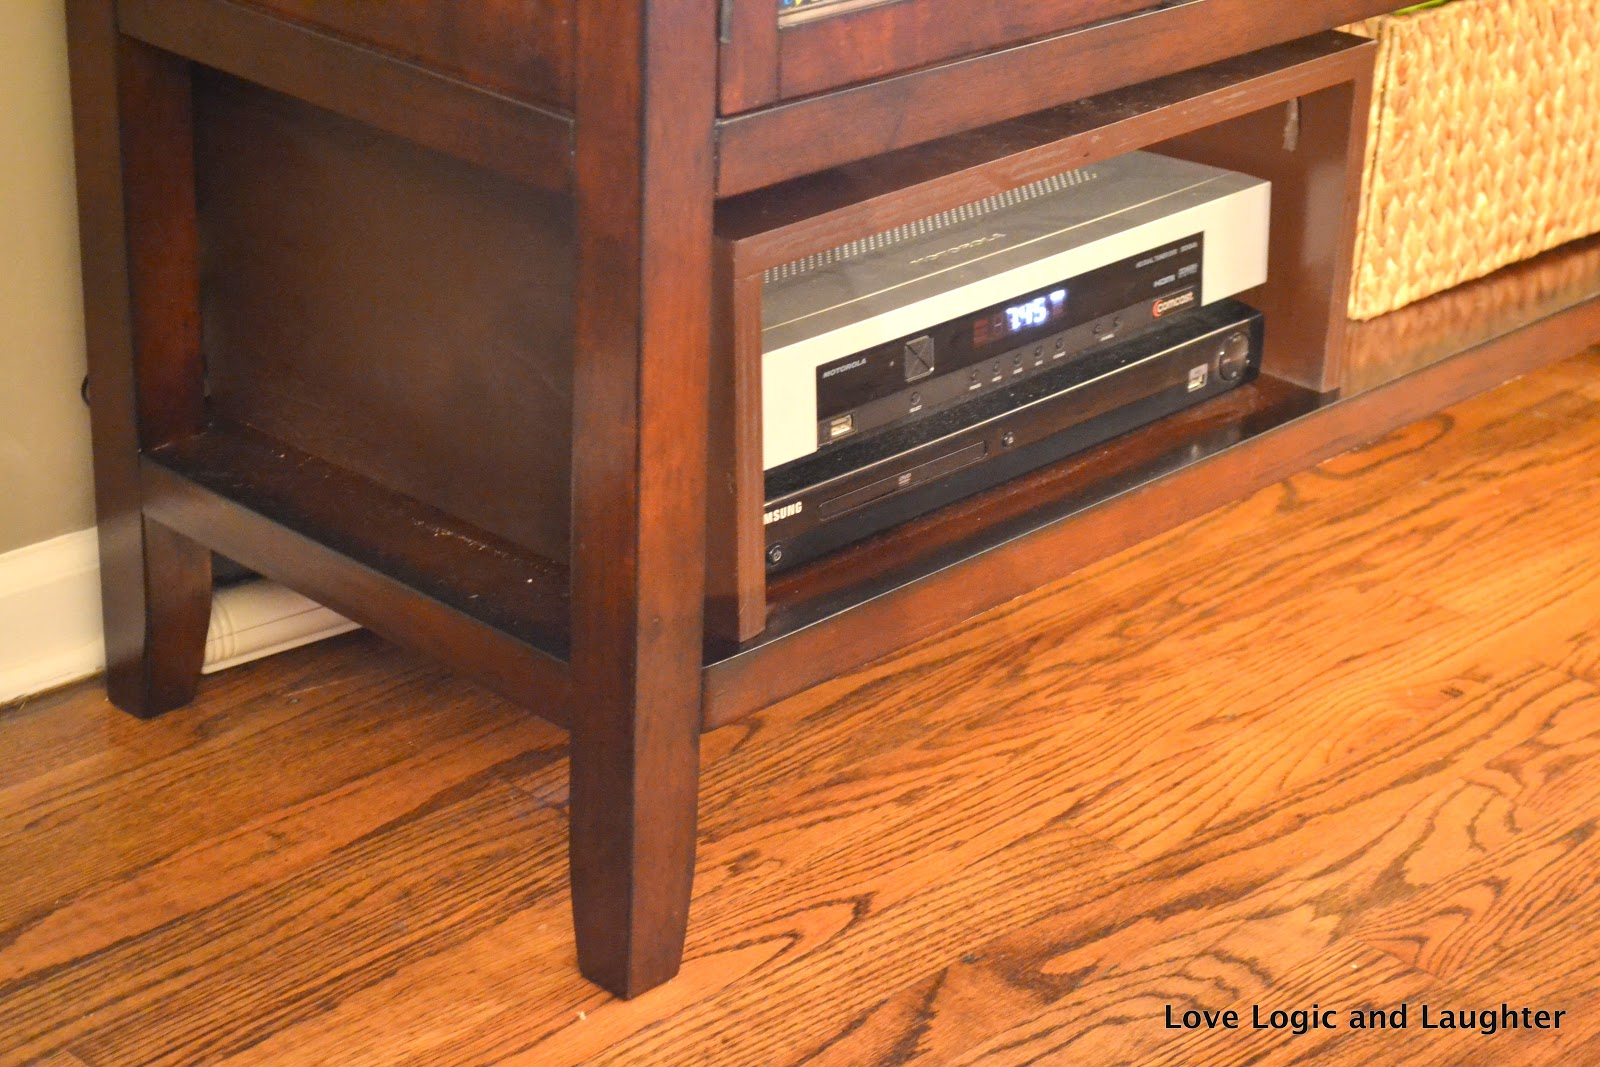 Make It Mommy: Baby-proofing the Cable Box - diy